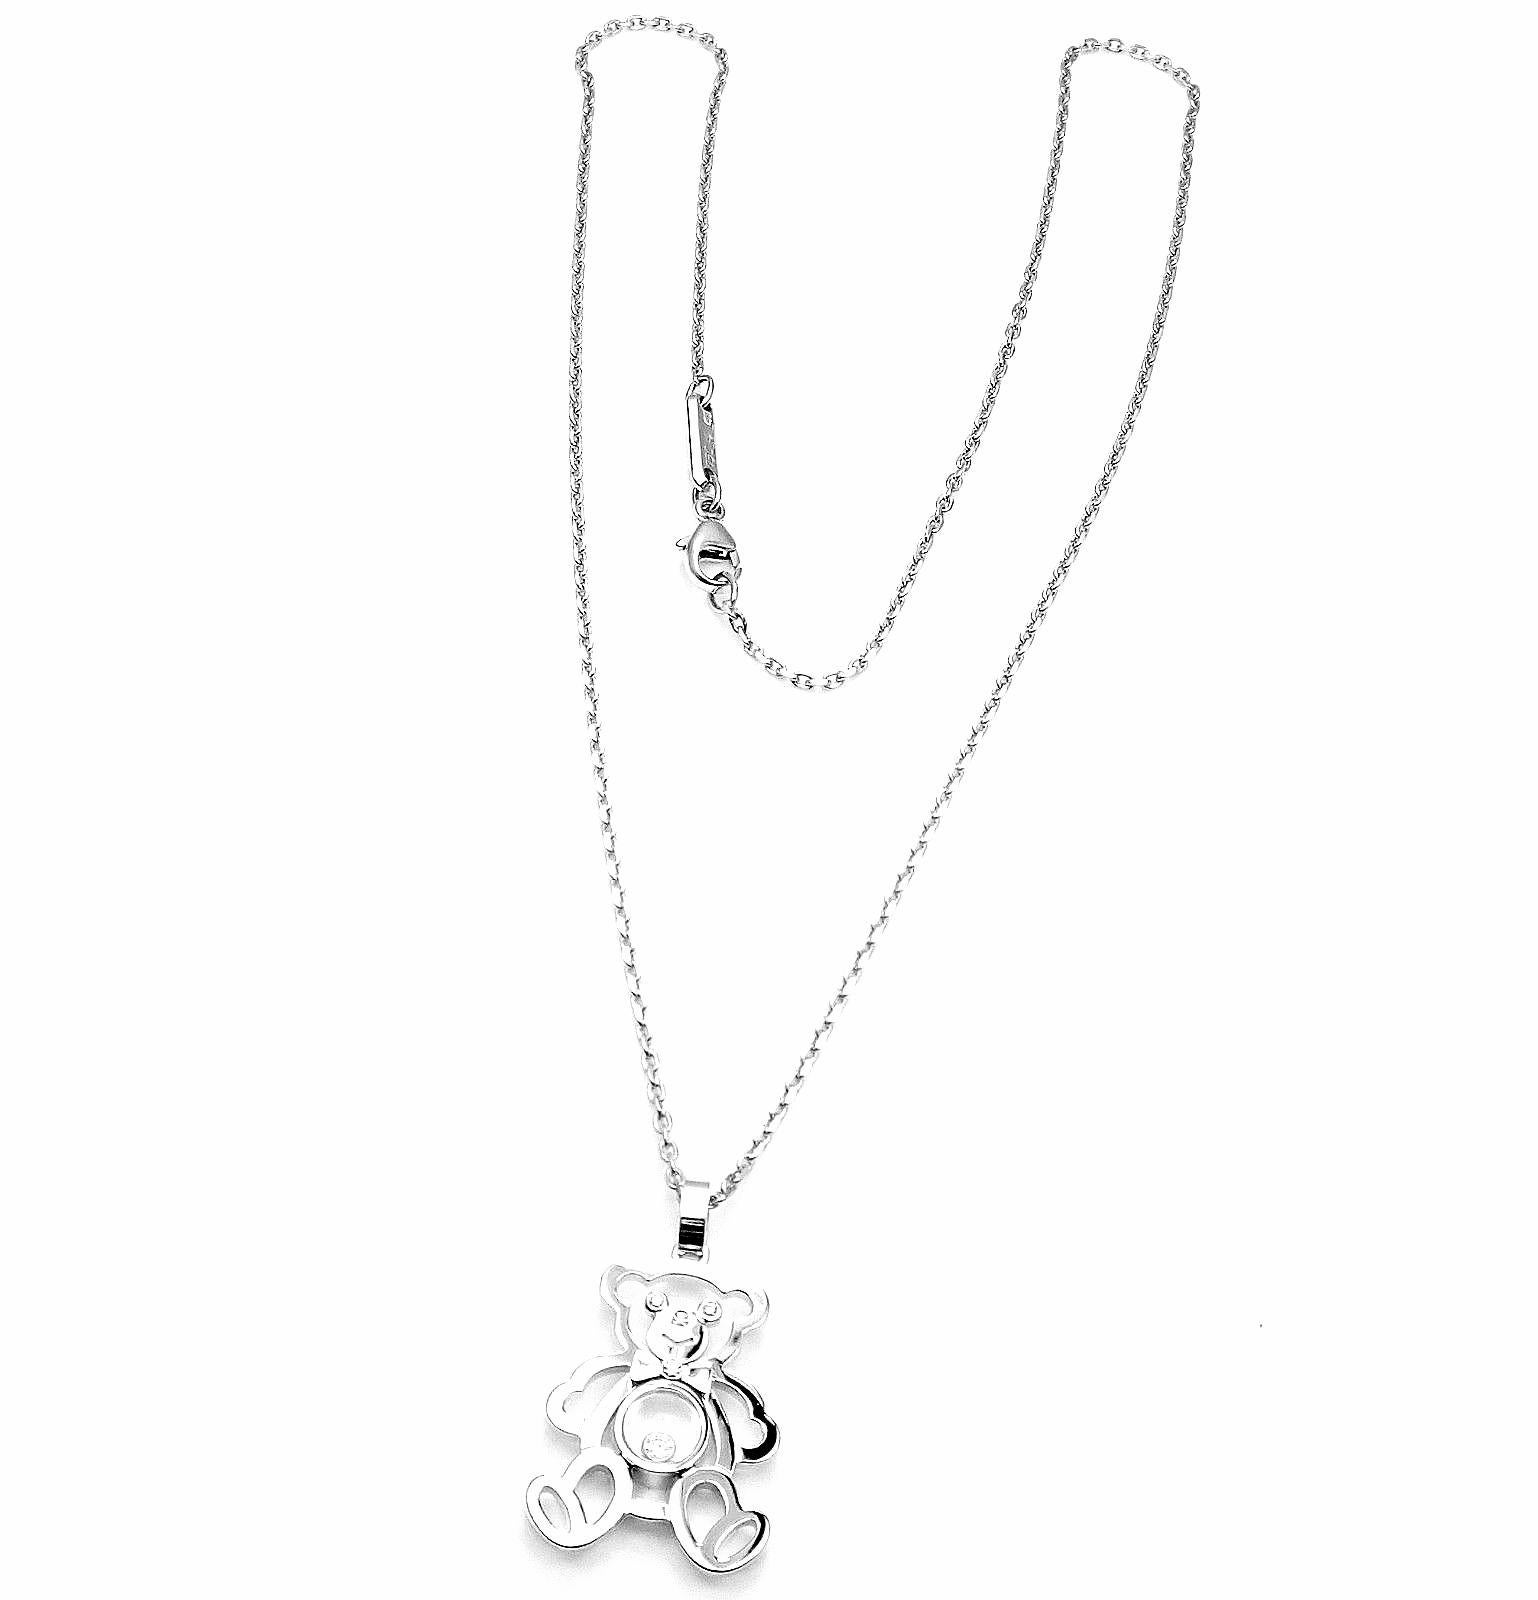 18k White Gold Happy Diamond Teddy Bear Pendant Necklace  by Chopard.  
With 5 round brilliant cut diamonds VVS1 clarity, E color total weight approx. .10ct
Details: 
Length: 16.5